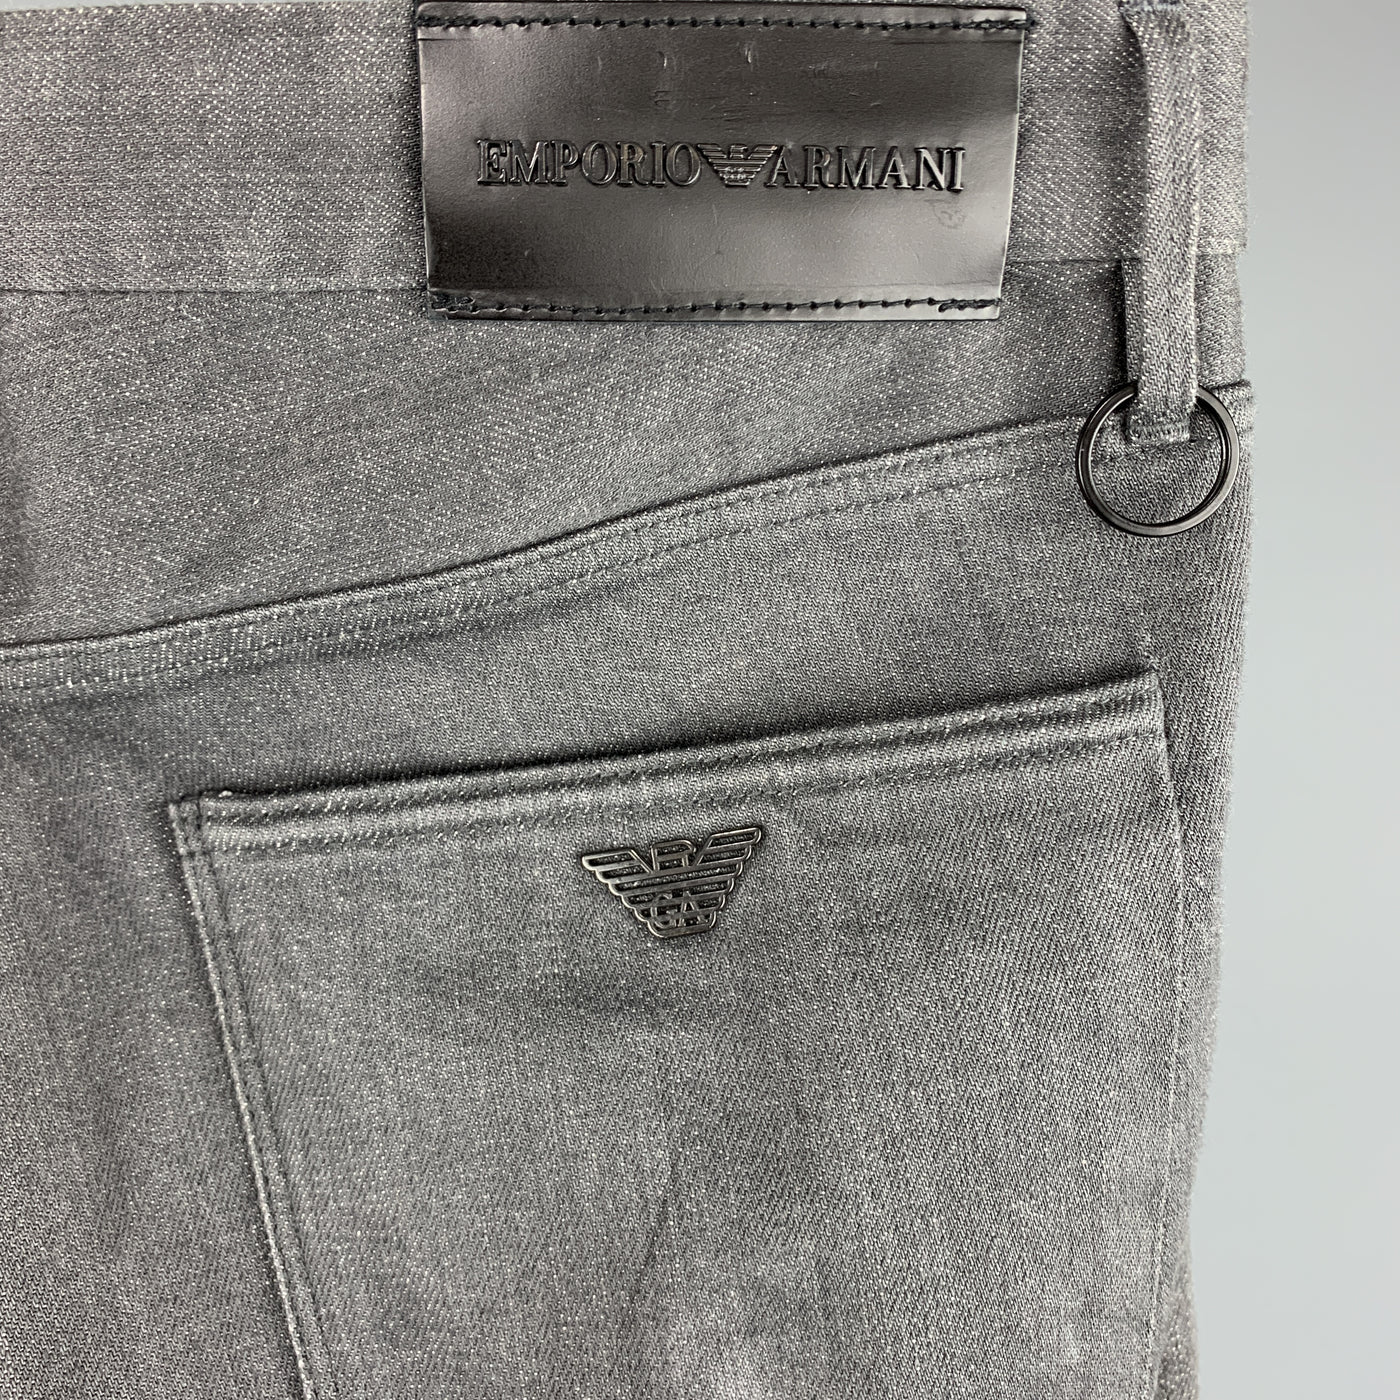 EMPORIO ARMANI Size 32 x 32 Charcoal Cotton Zip Fly Jeans